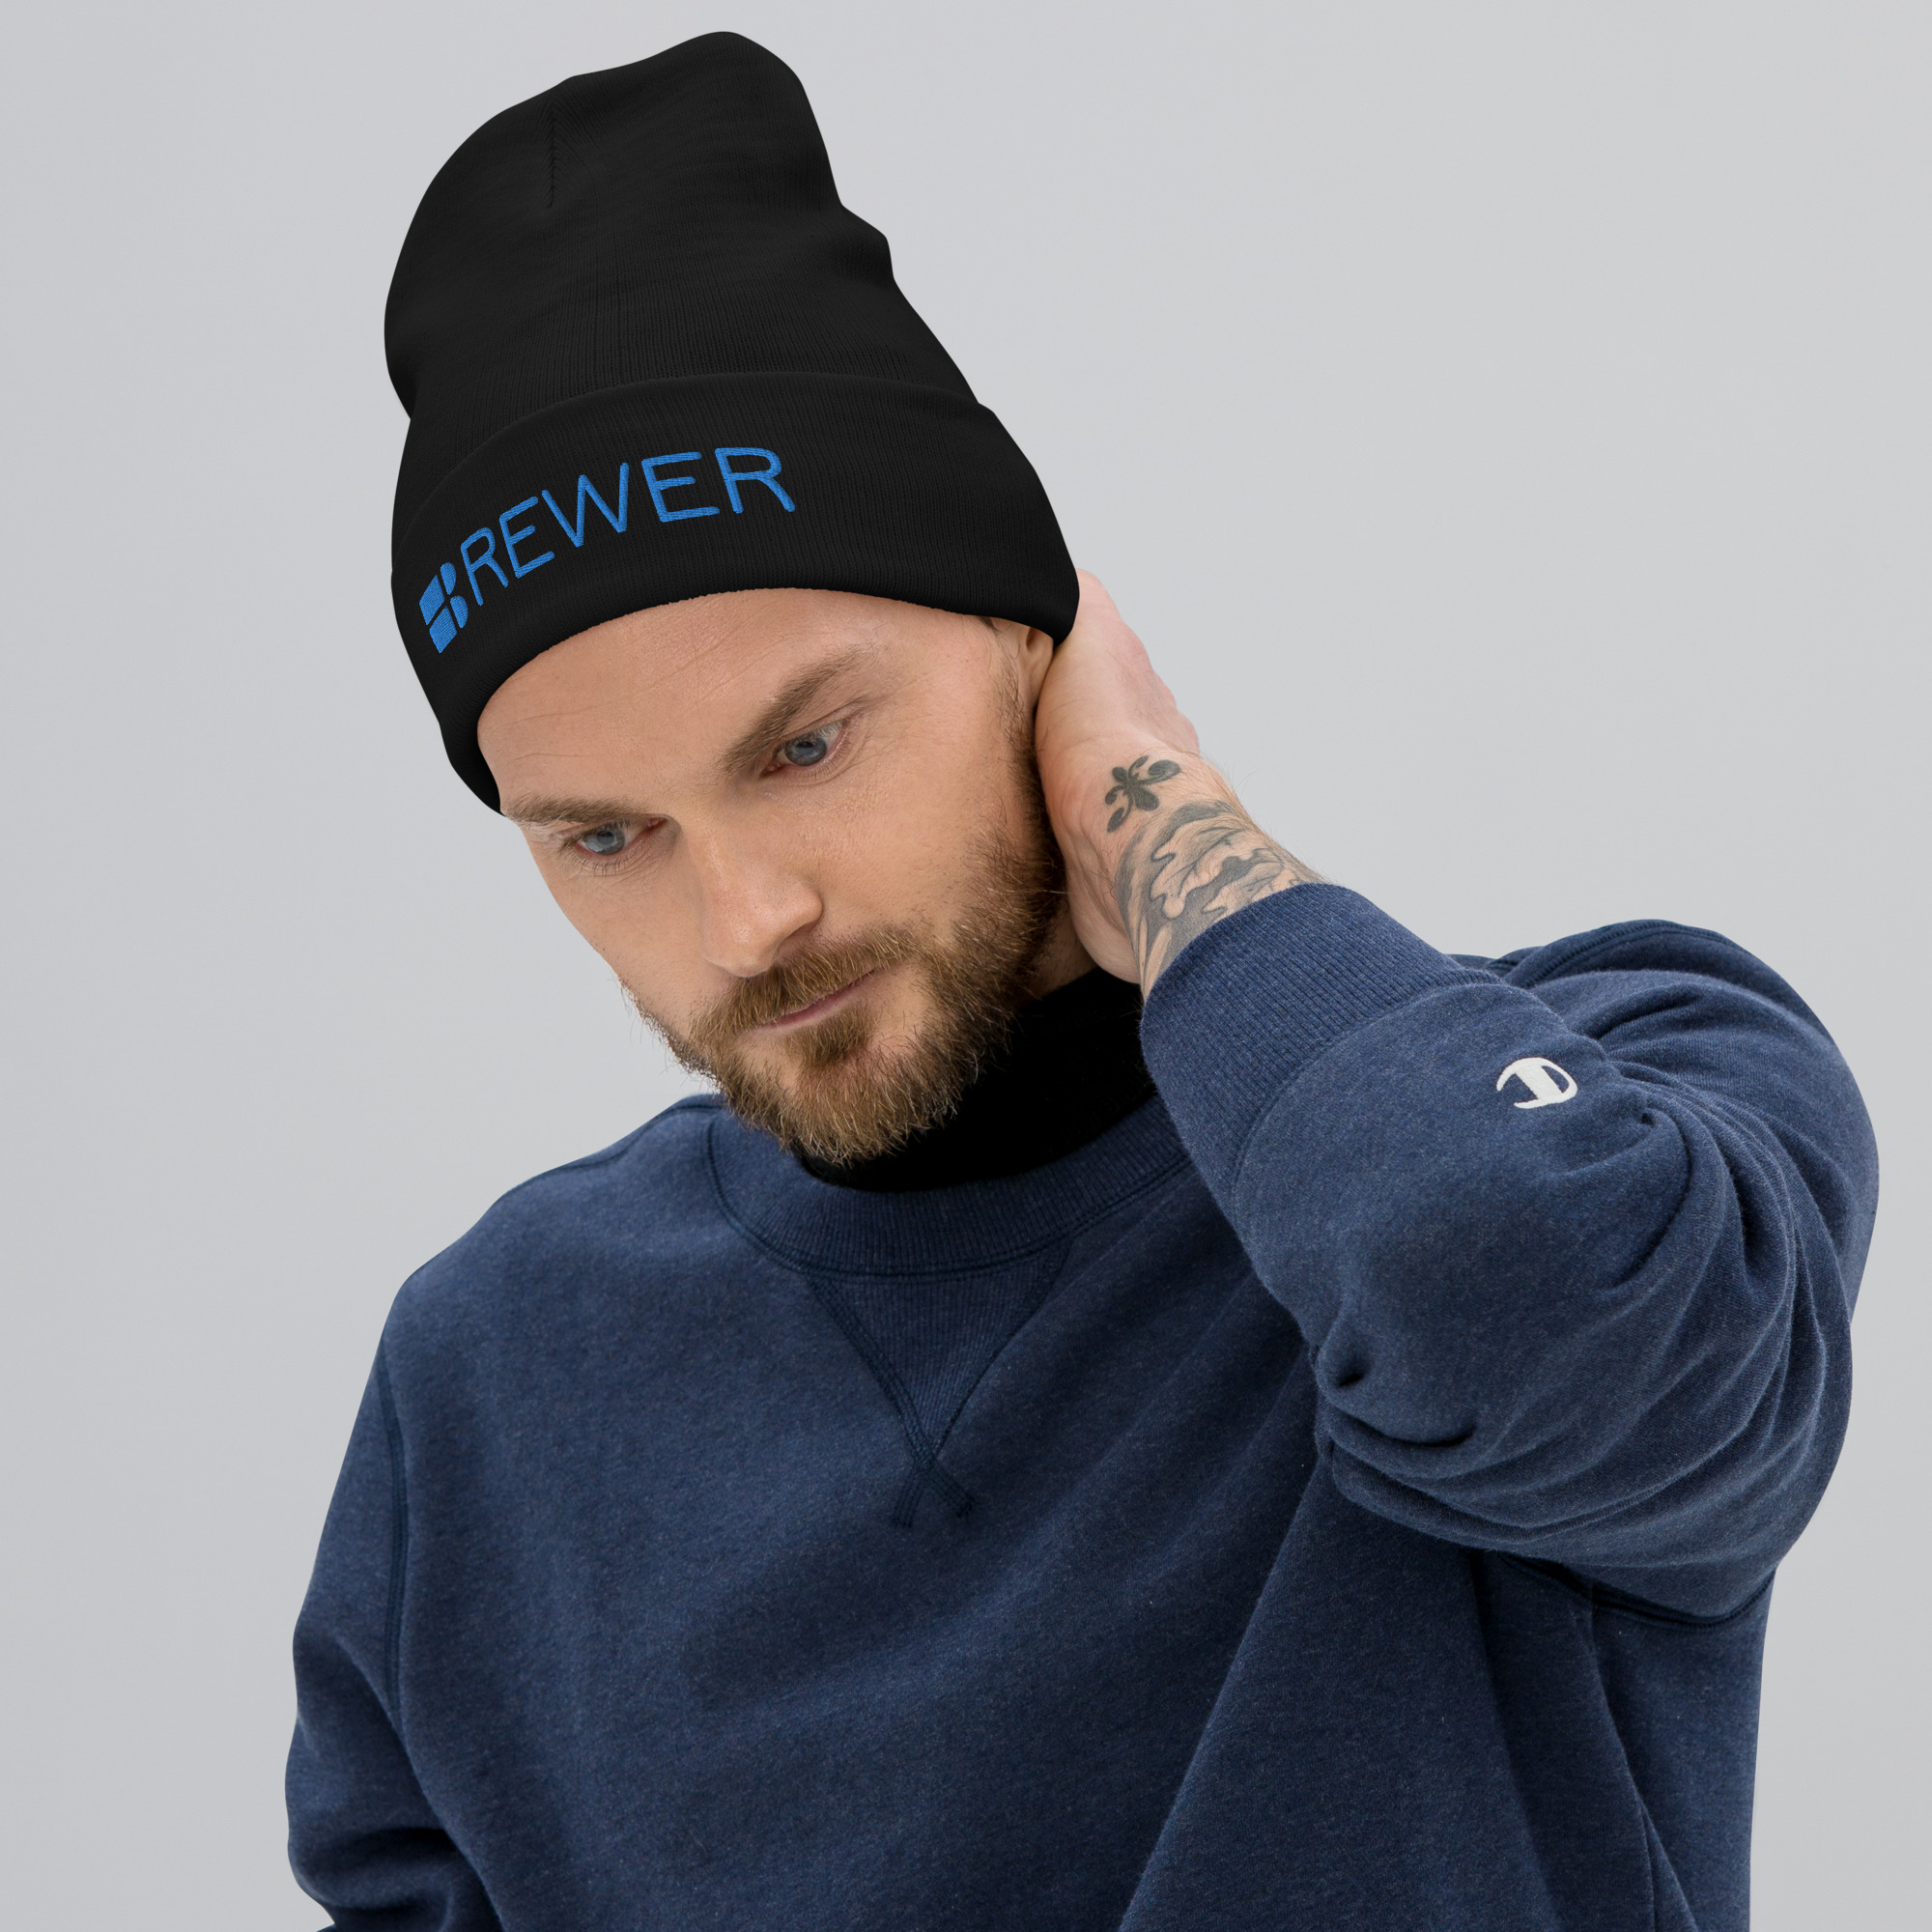 Man wearing black beanie with Brewer Corporation logo embroidered on the front in blue